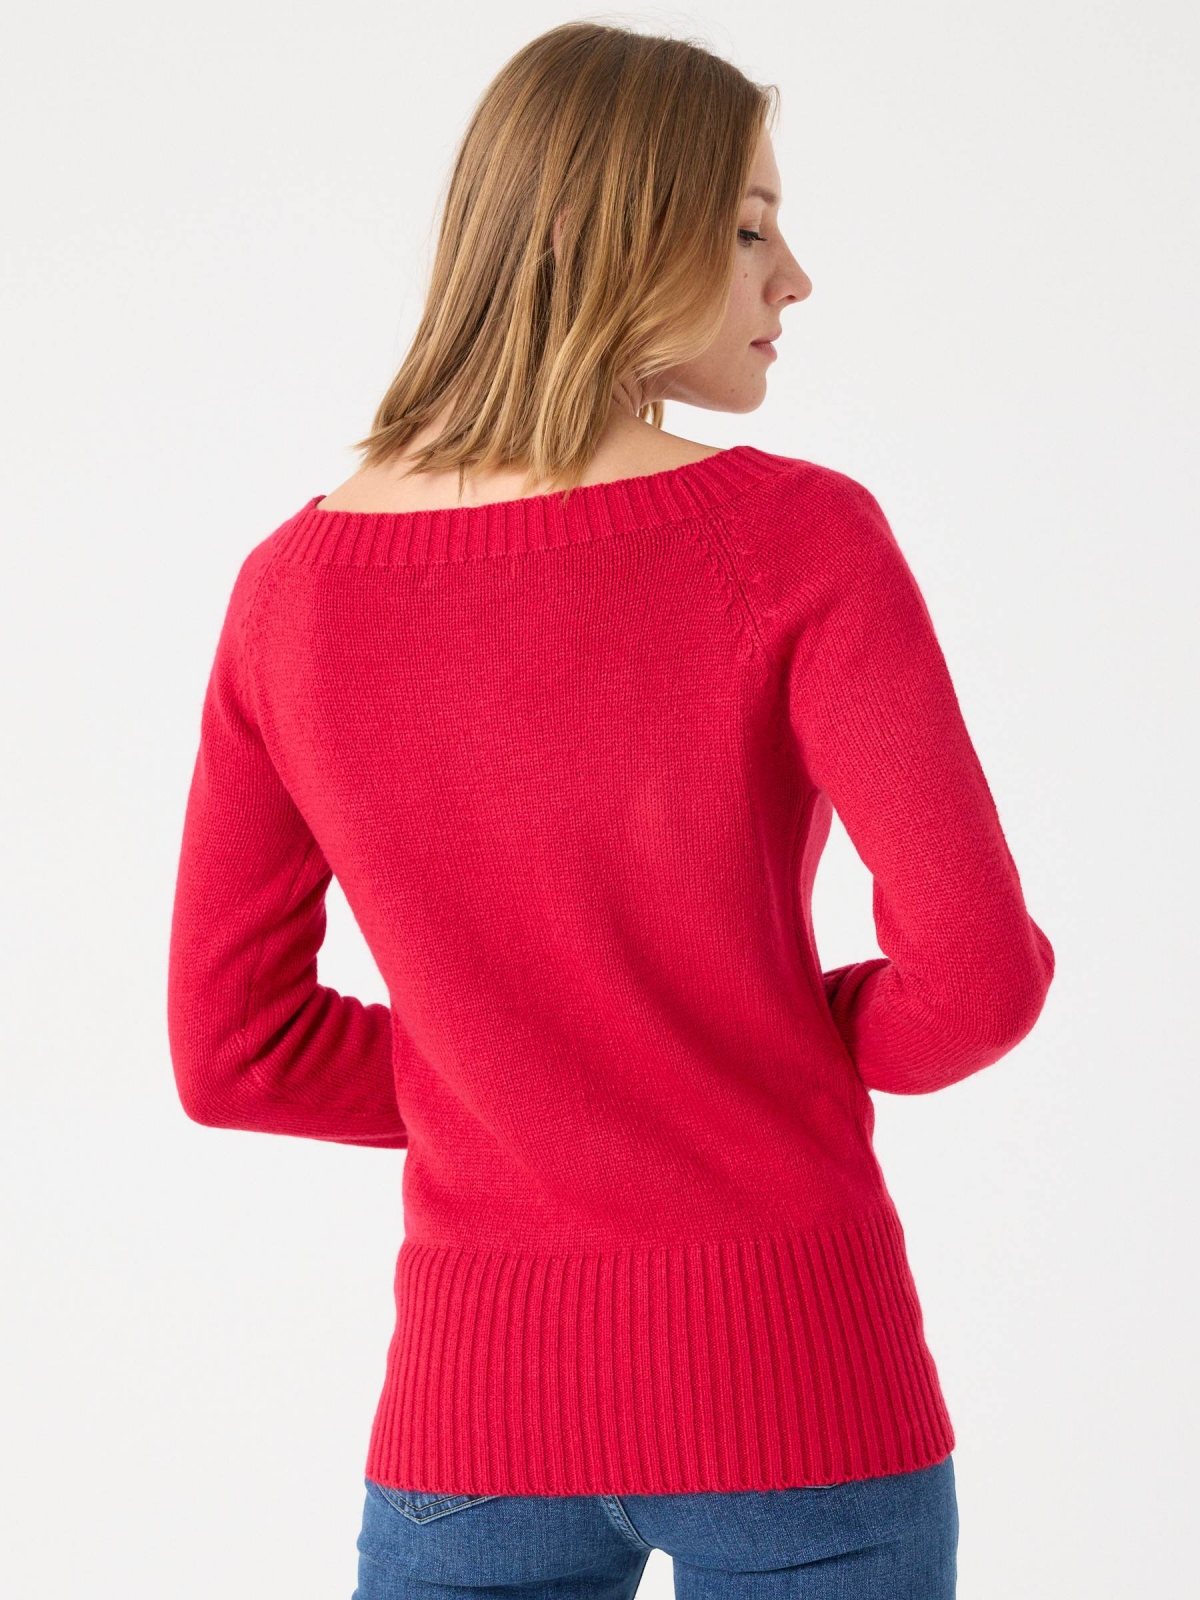 Marbled boat sweater red middle back view